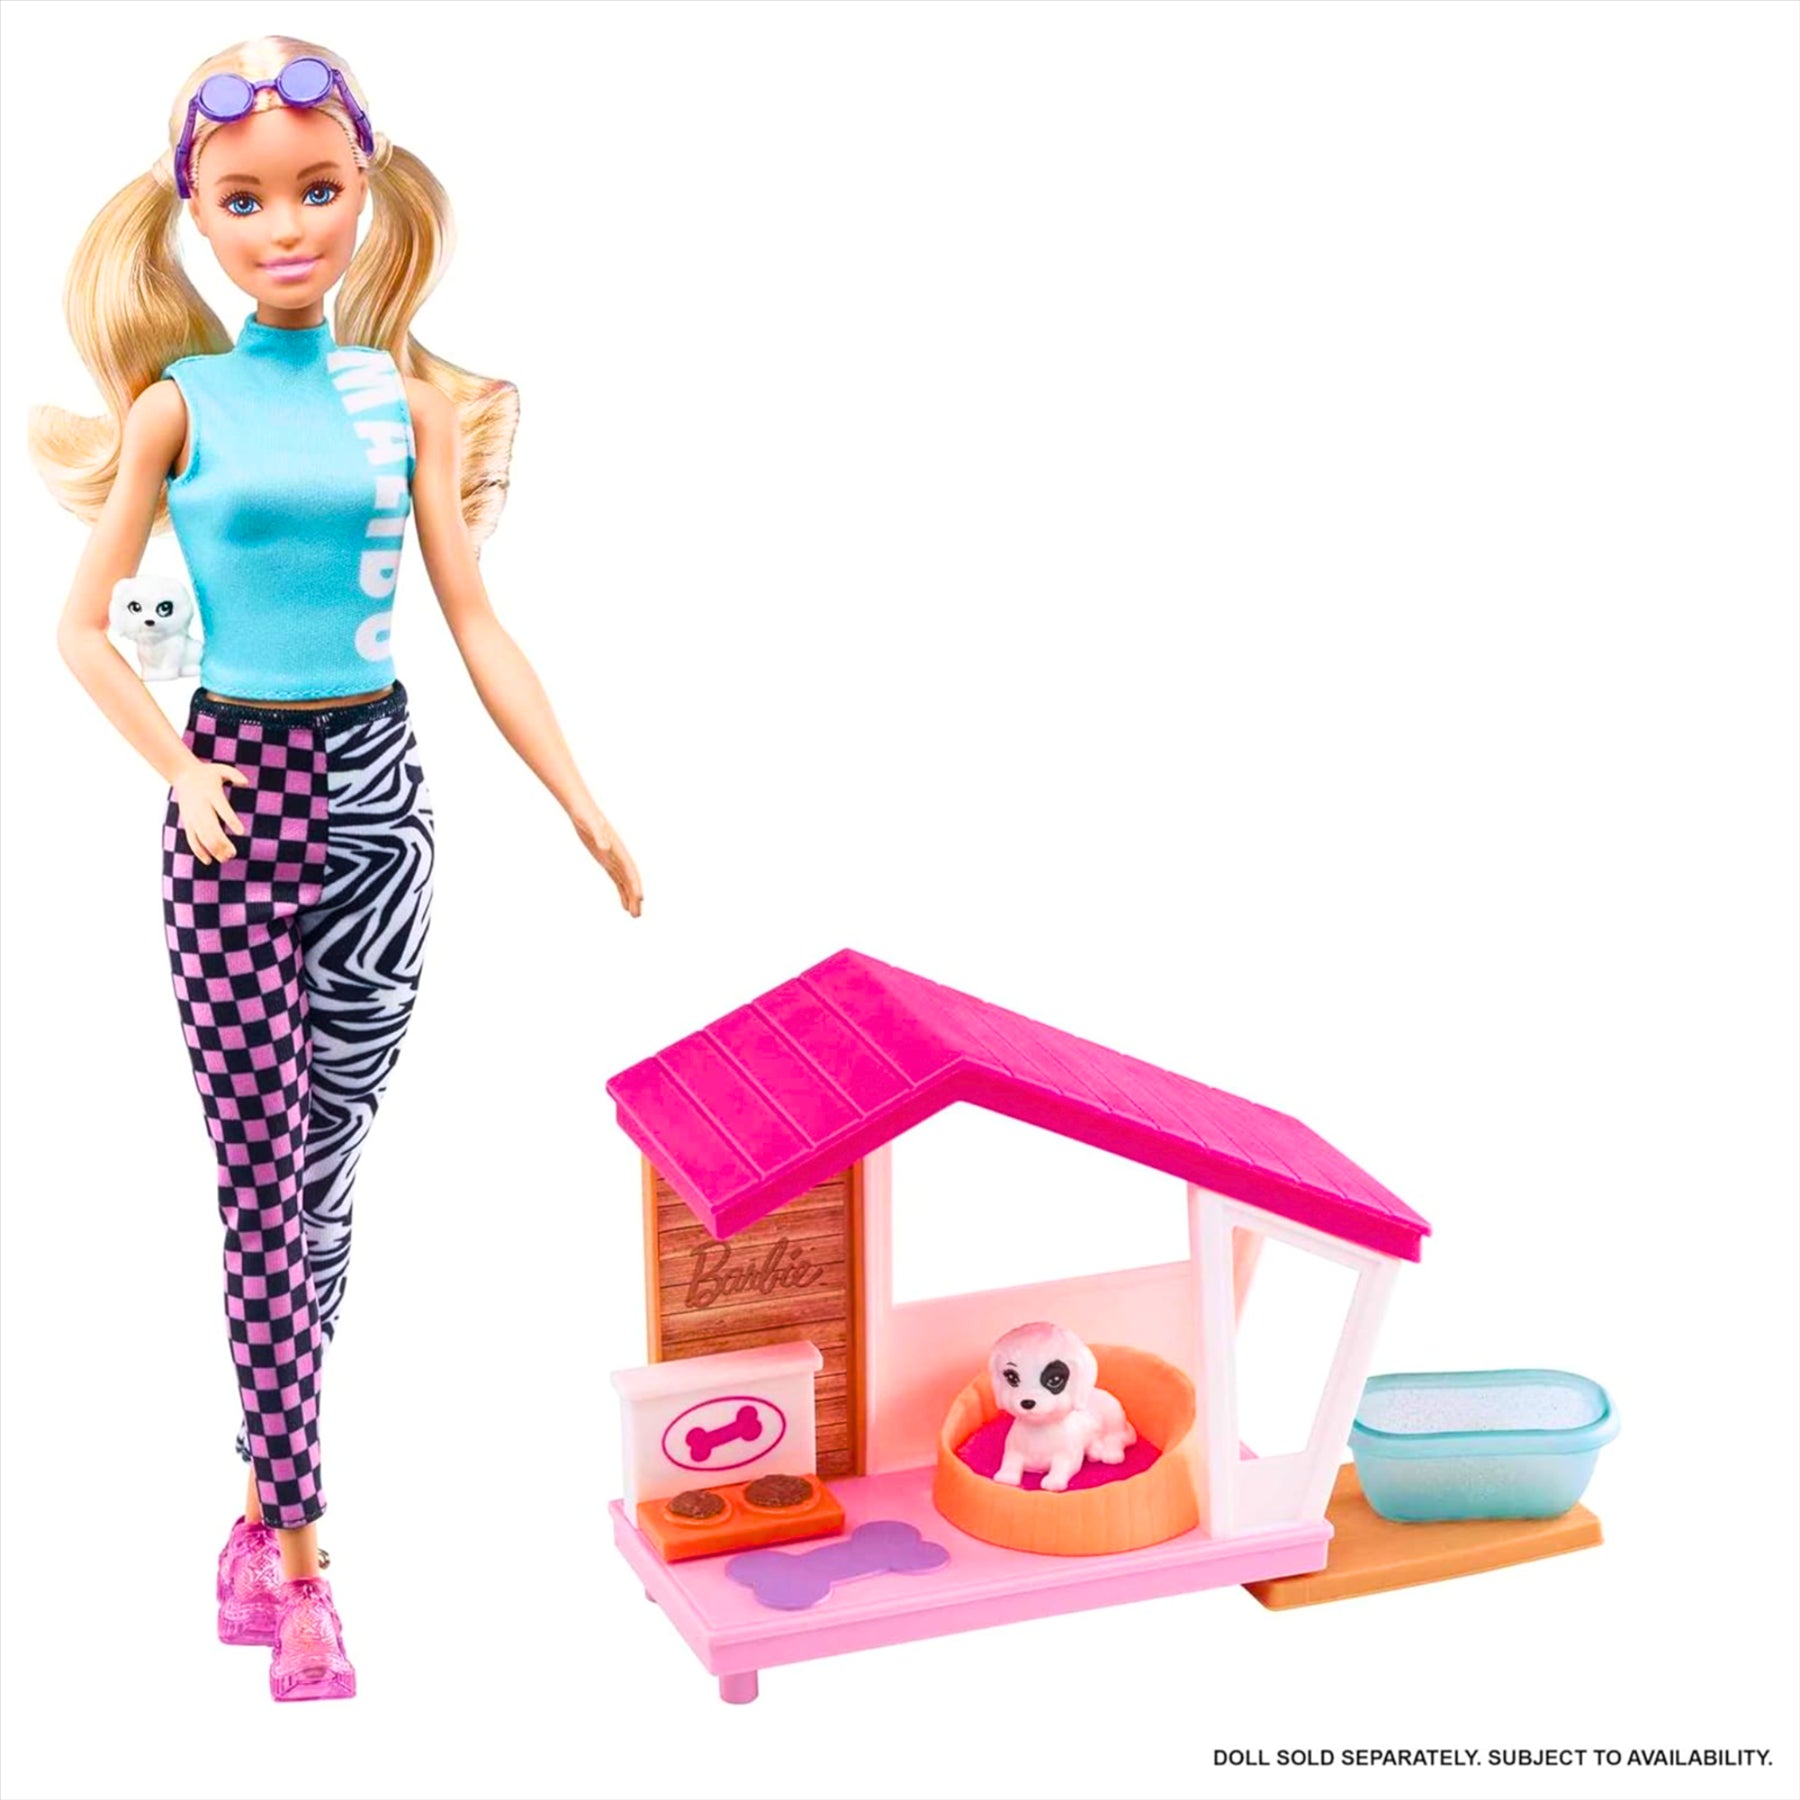 Barbie Dog Kennel Playset with Dogs and Accessories - Includes 2 Dog Figures, Kennel, Bed, Blanket, Bath, Water Bowl, and Chew Toy - Toptoys2u